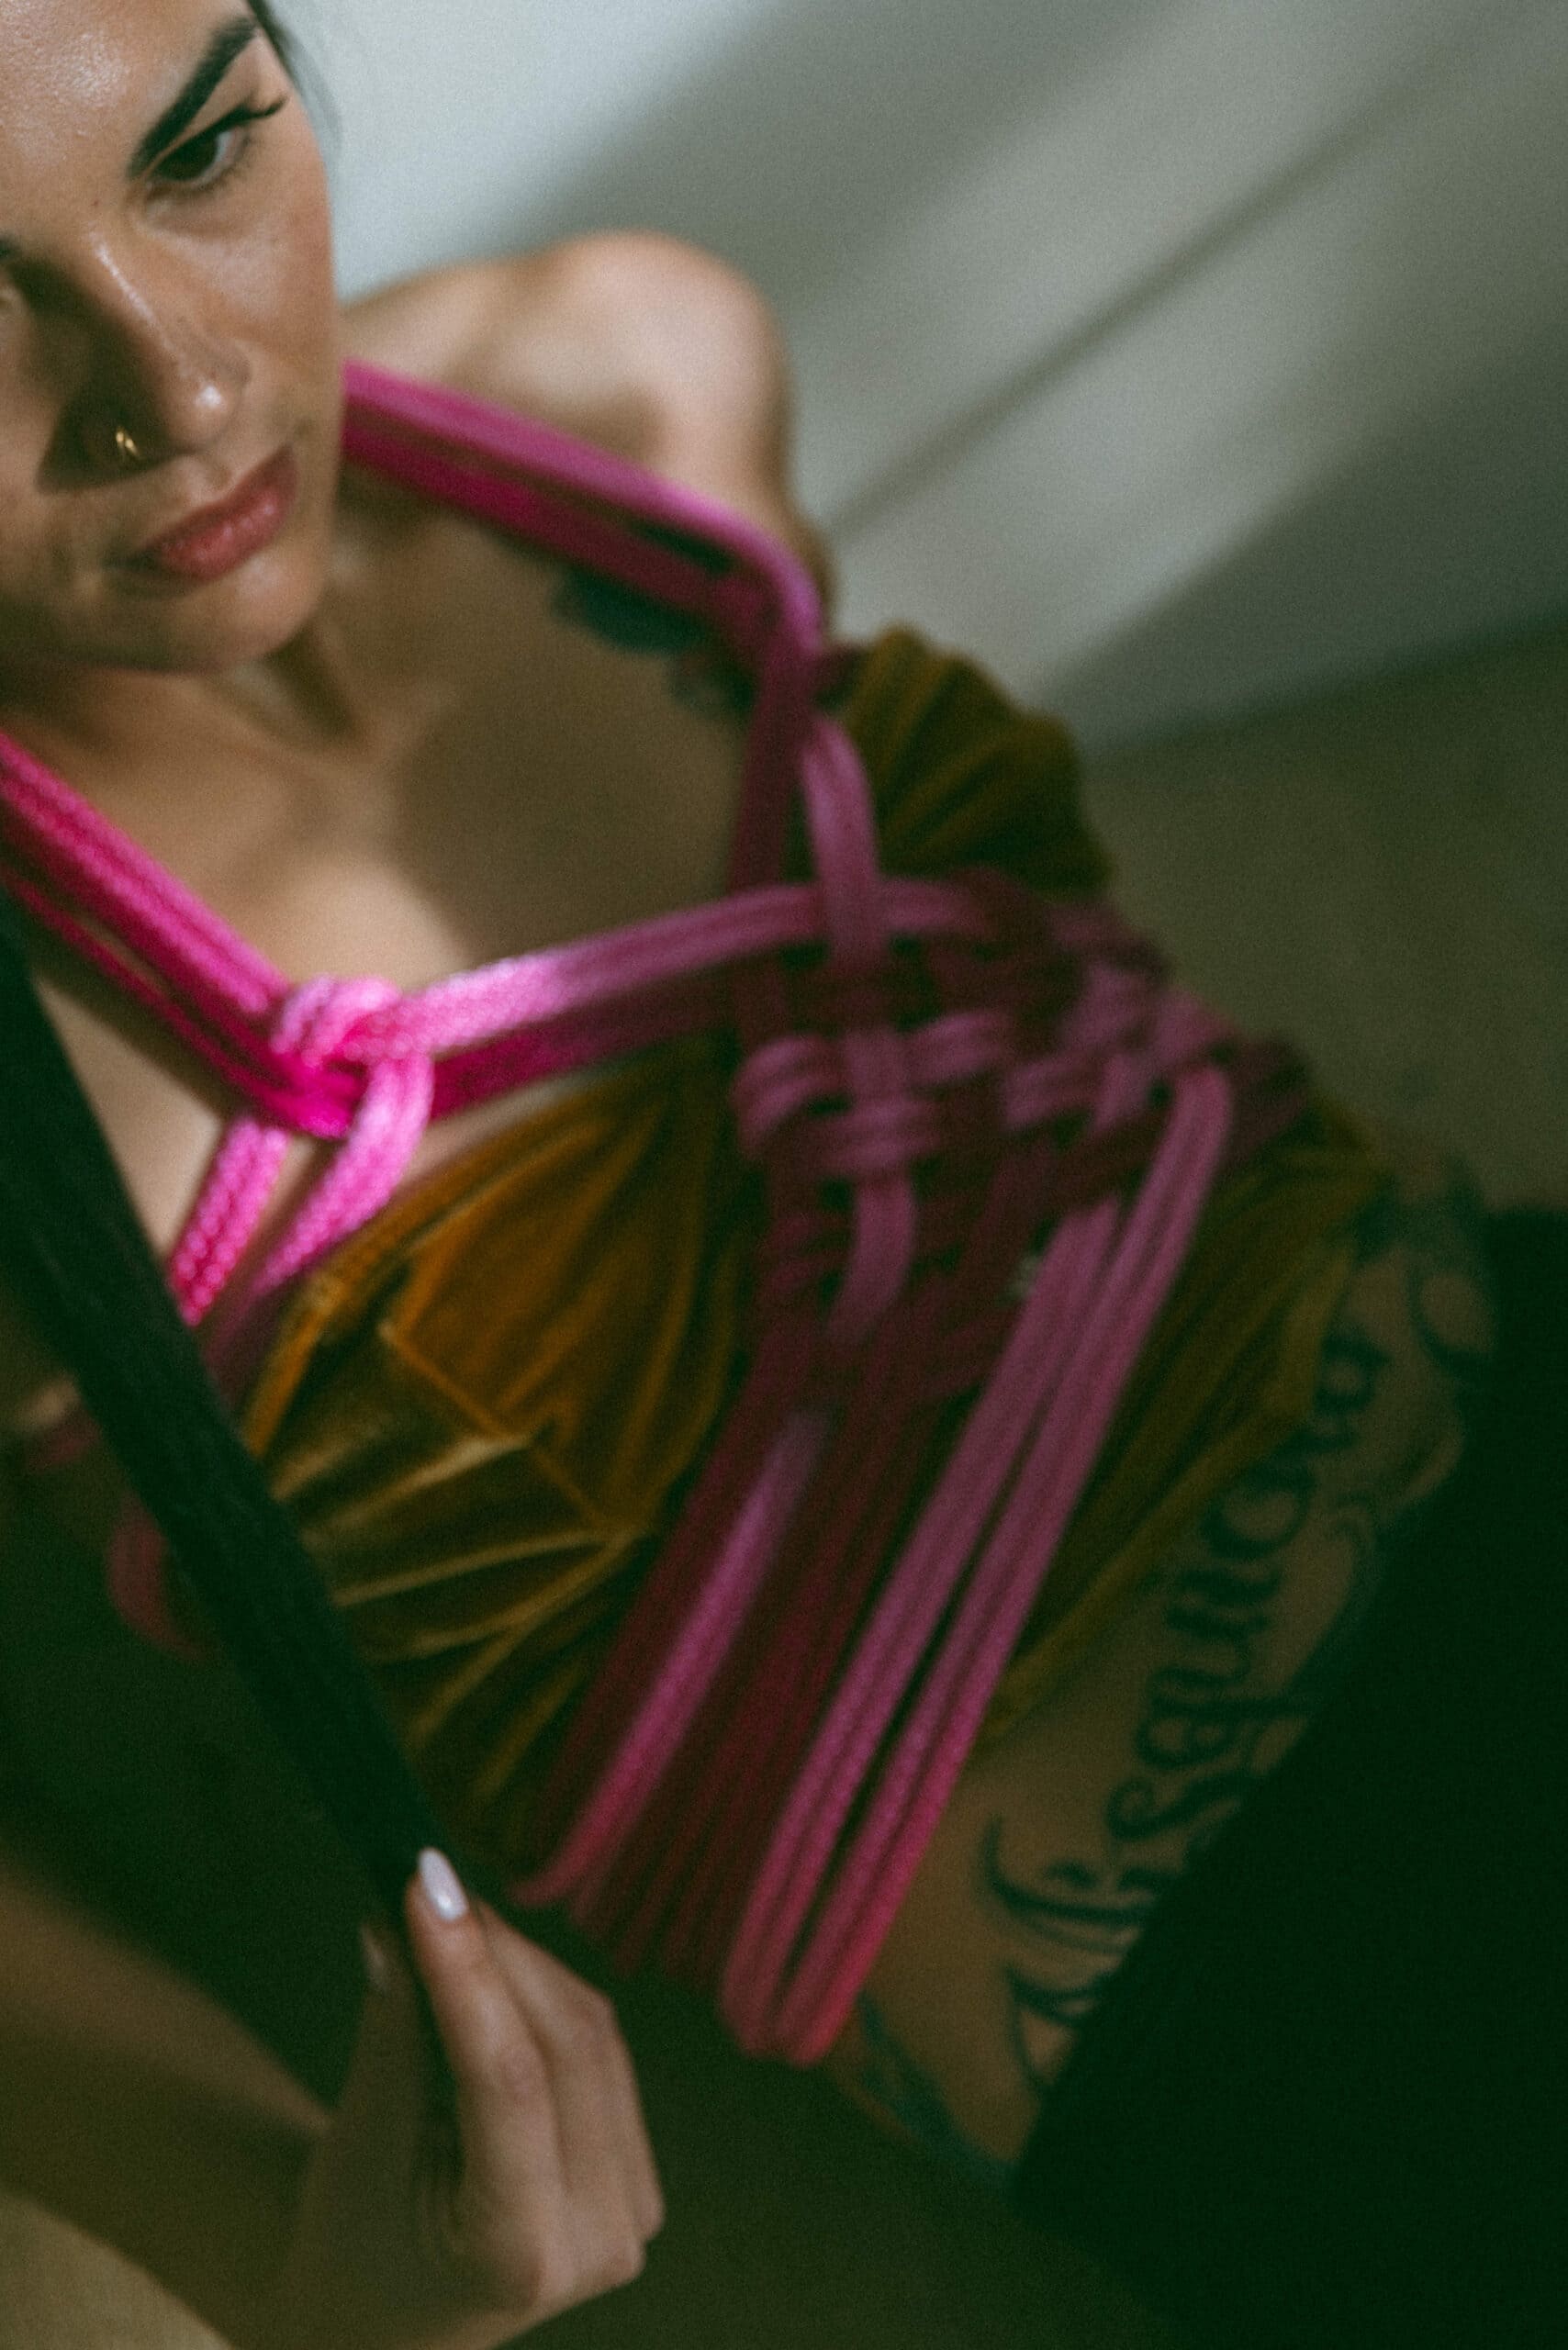 an artistic view of a woman with pink ropes tied around her torso